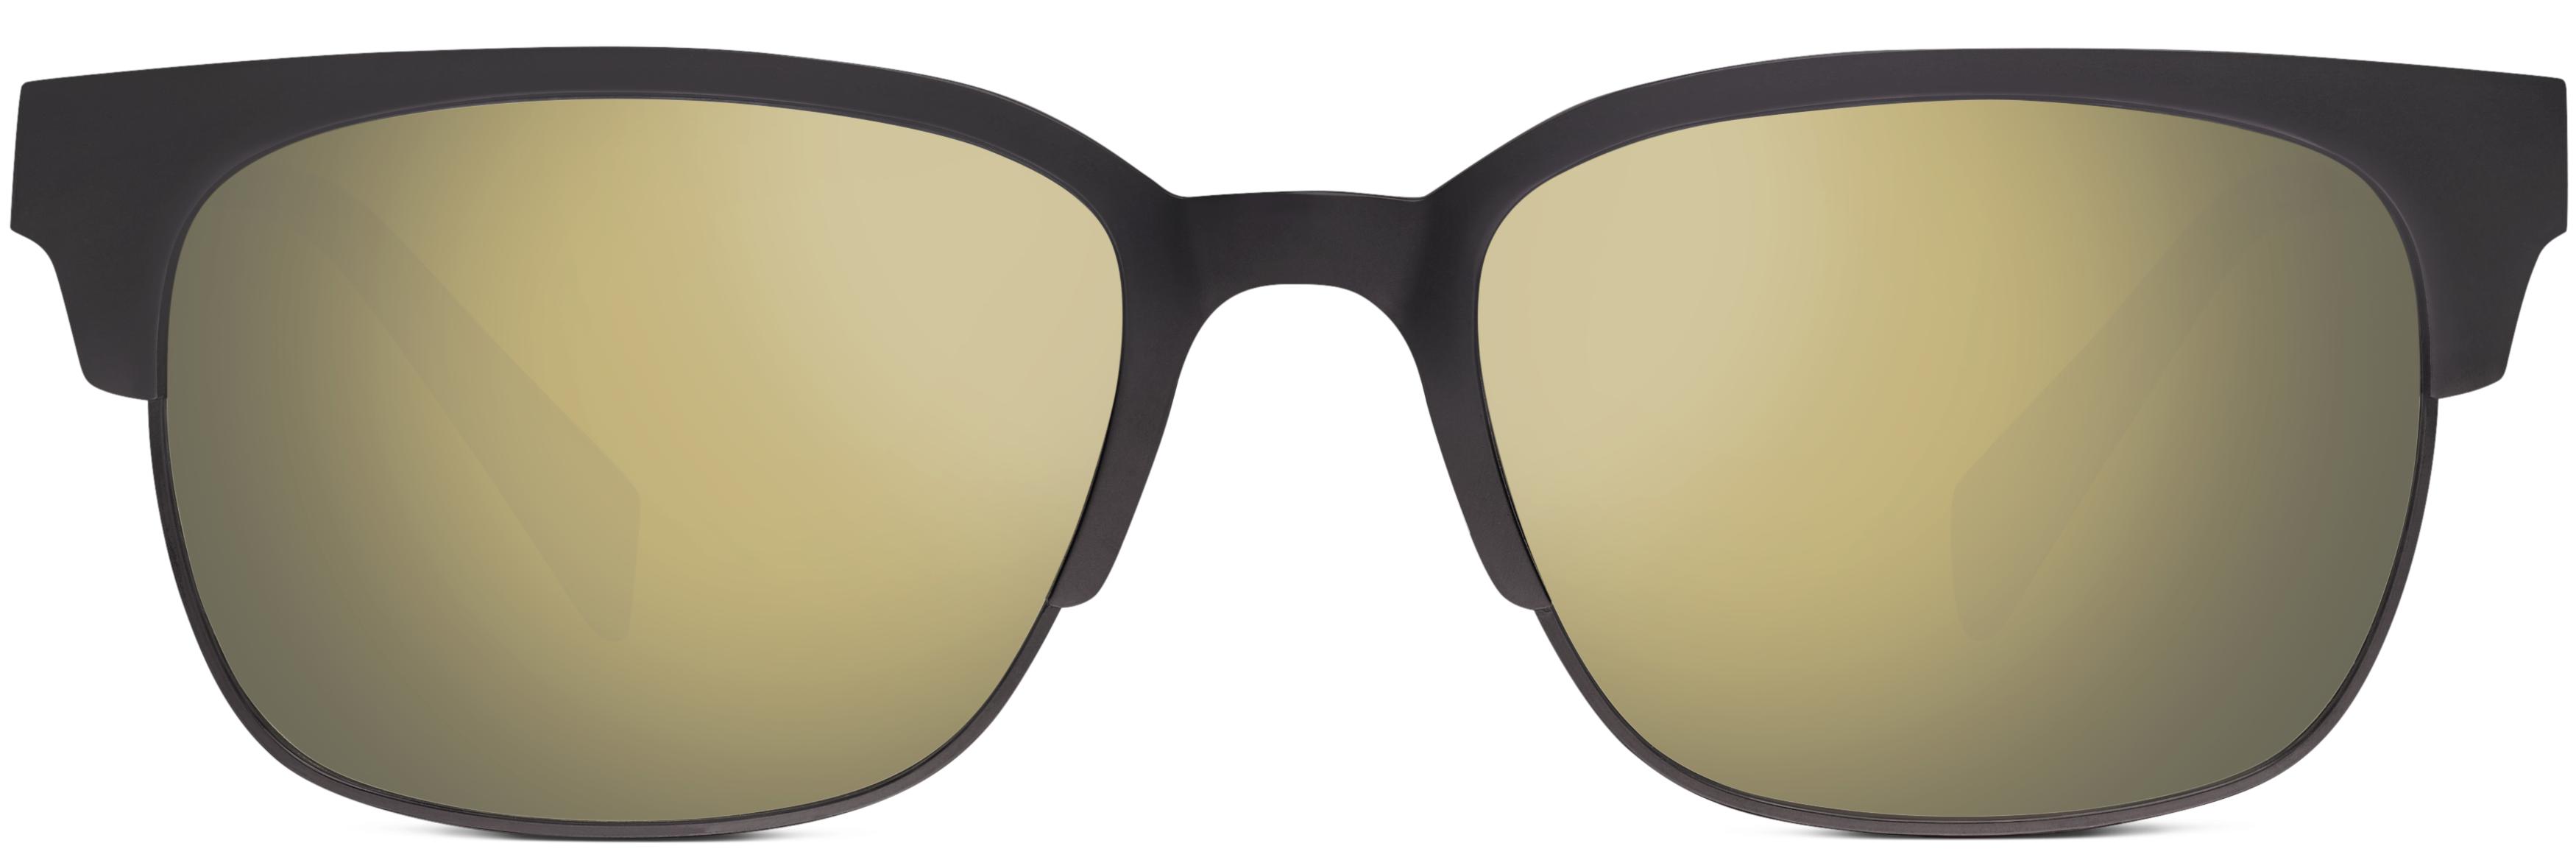 Markham Sunglasses in Carbon | Warby Parker